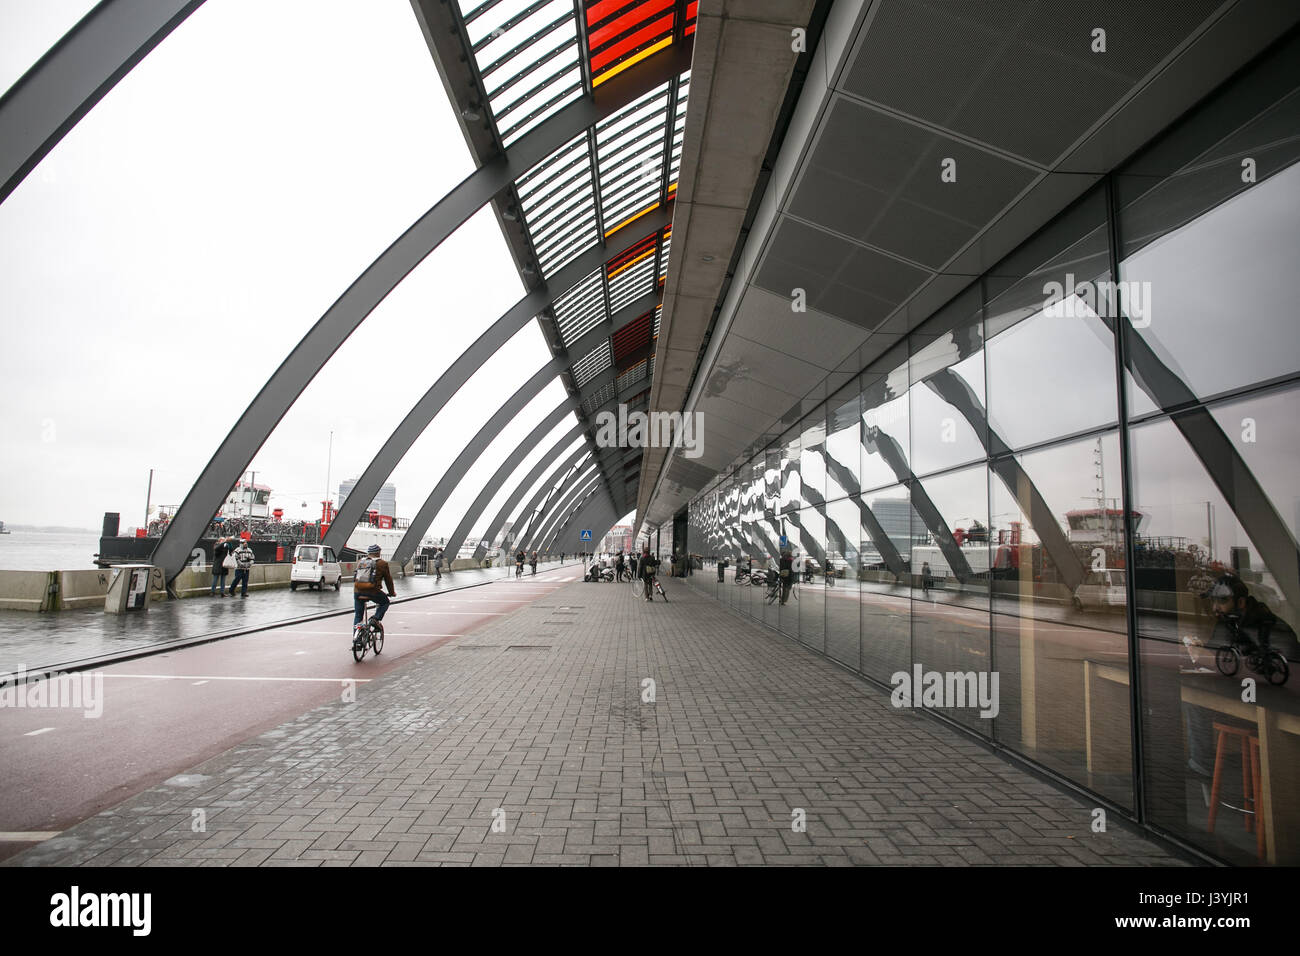 Taking a walk at Amsterdam Centraal Station Stock Photo